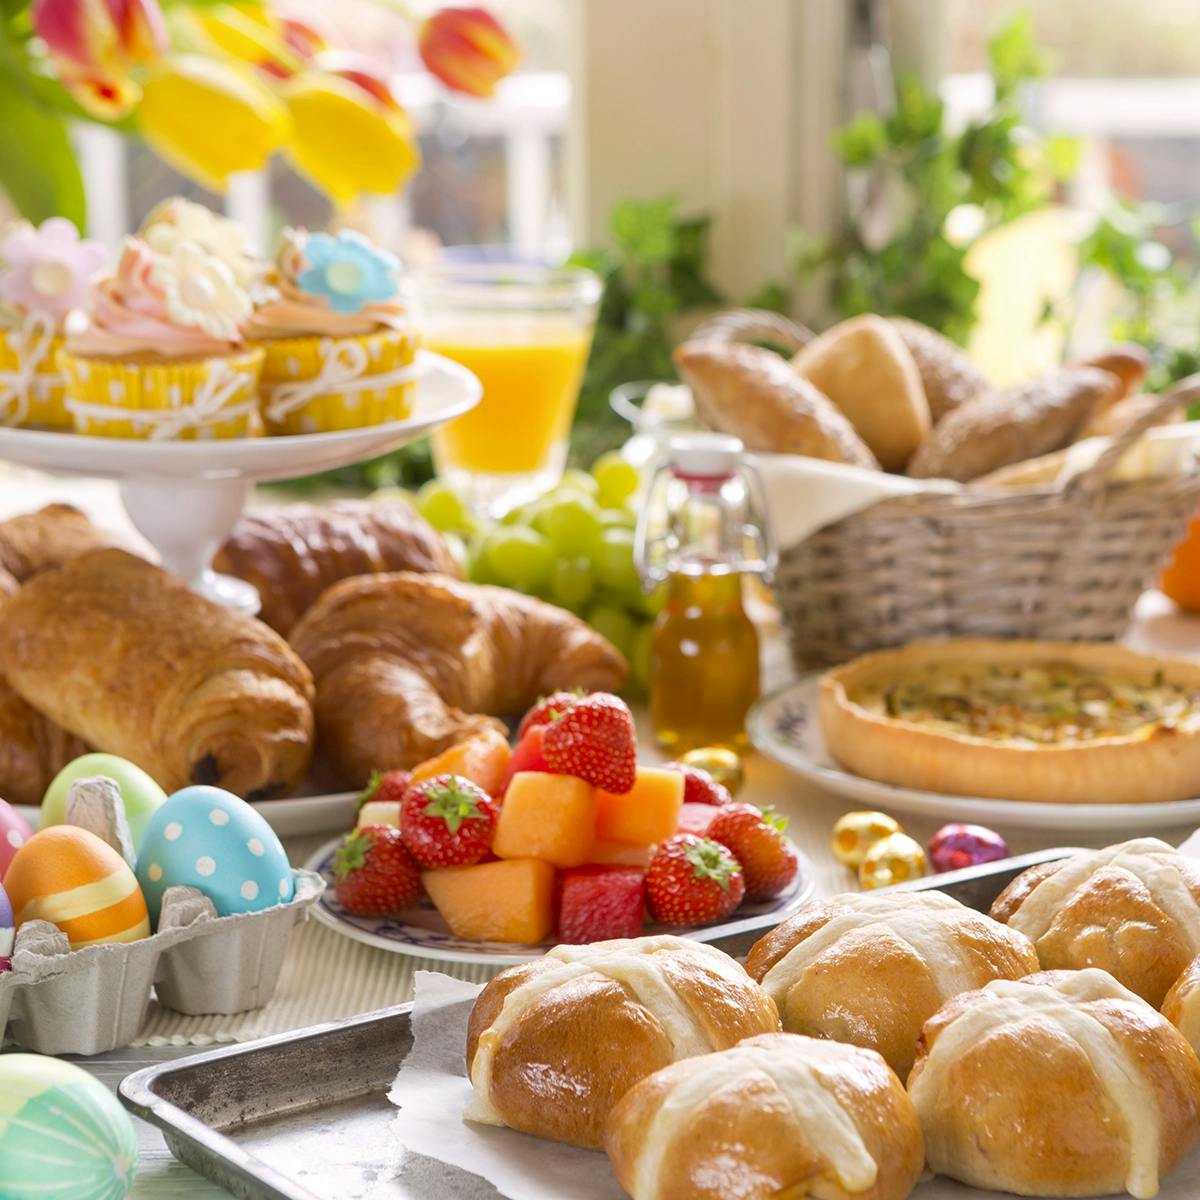 Spring table set for Easter brunch with fruit, croissants, and hot cross buns